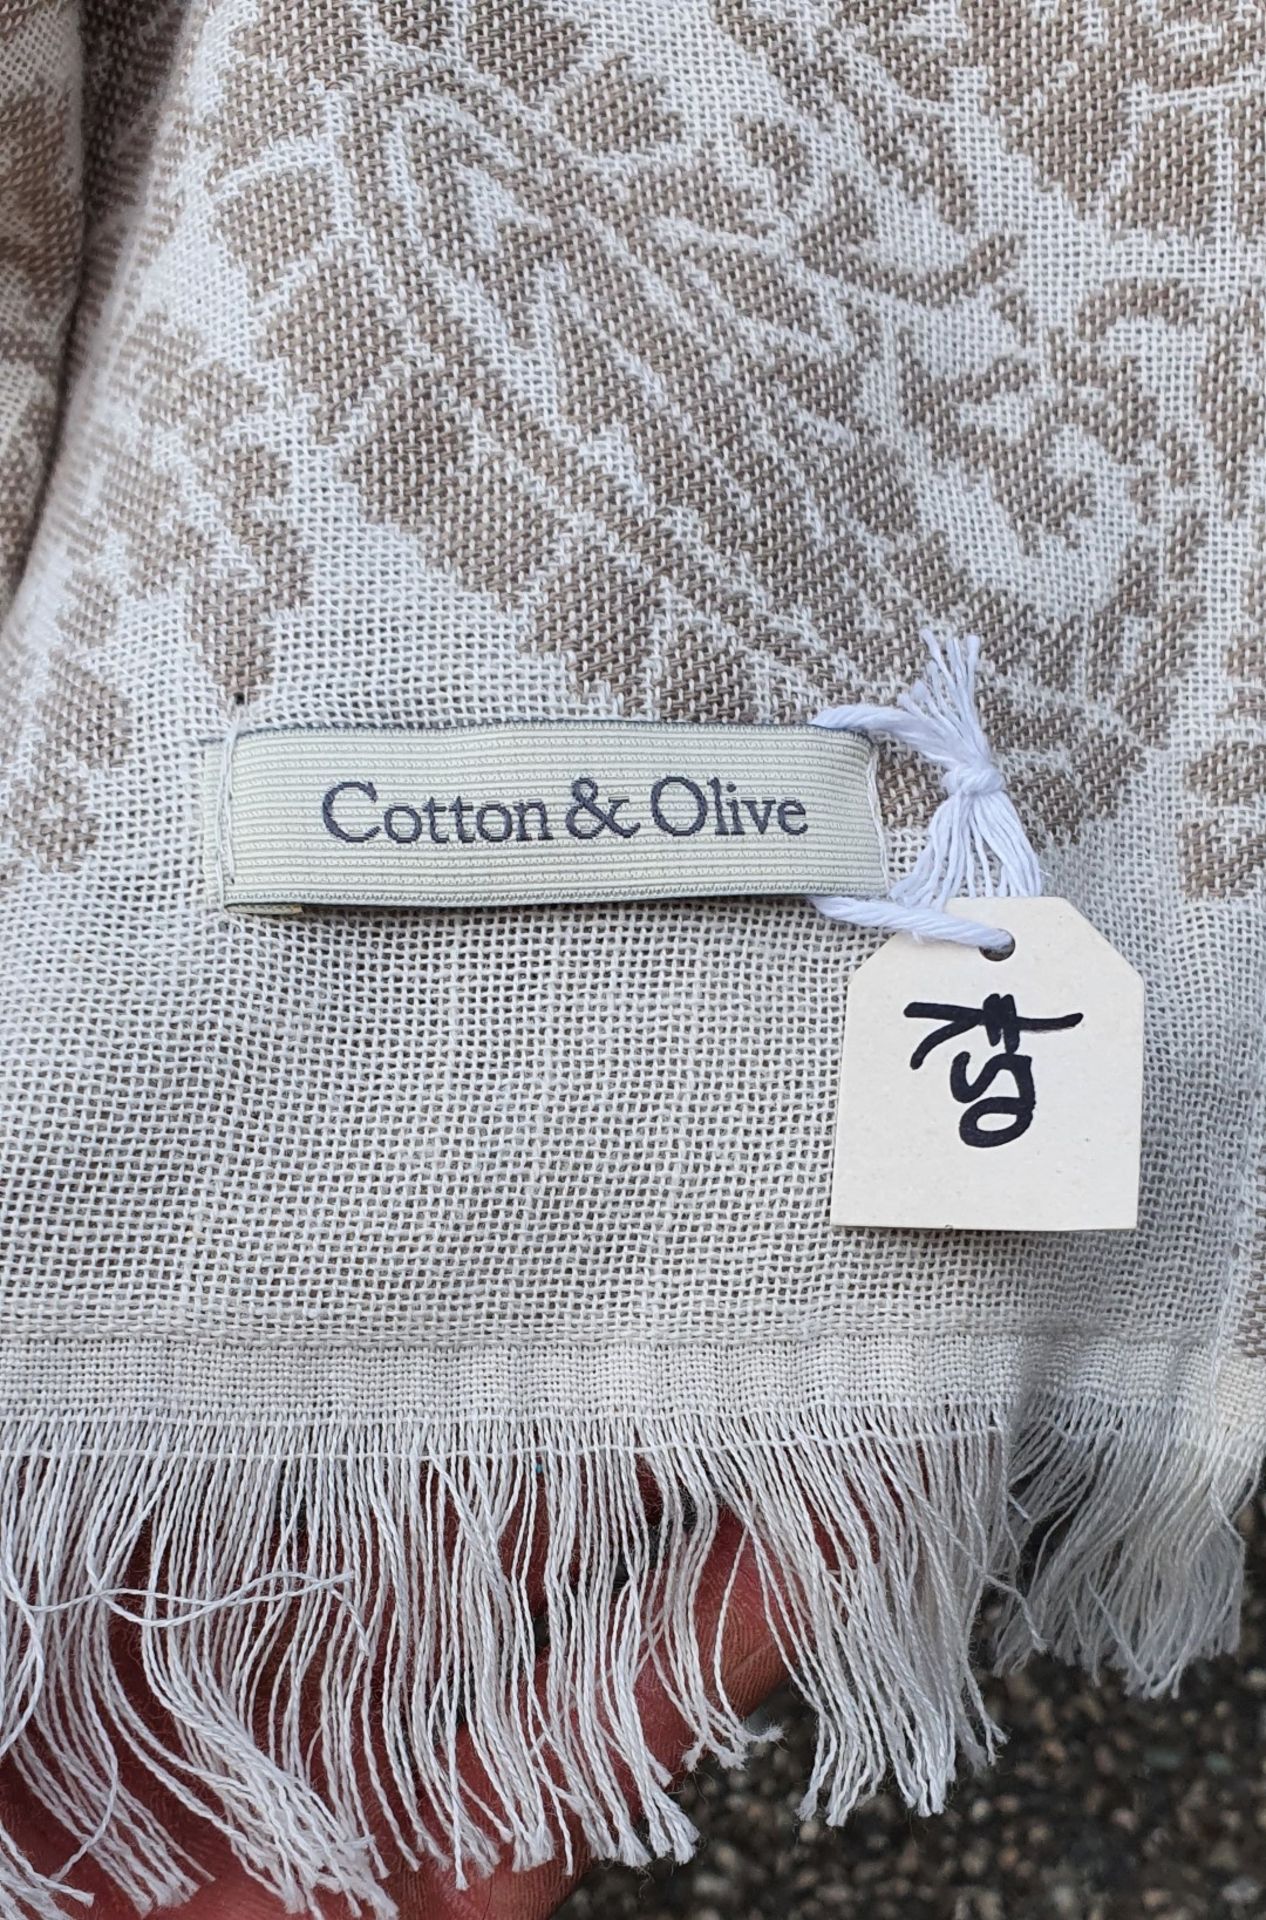 1 x Cotton & Olive Bedspread / Throw - Approx 2m in Length - New Unused Stock - Ref: TCH269B - CL840 - Image 3 of 4